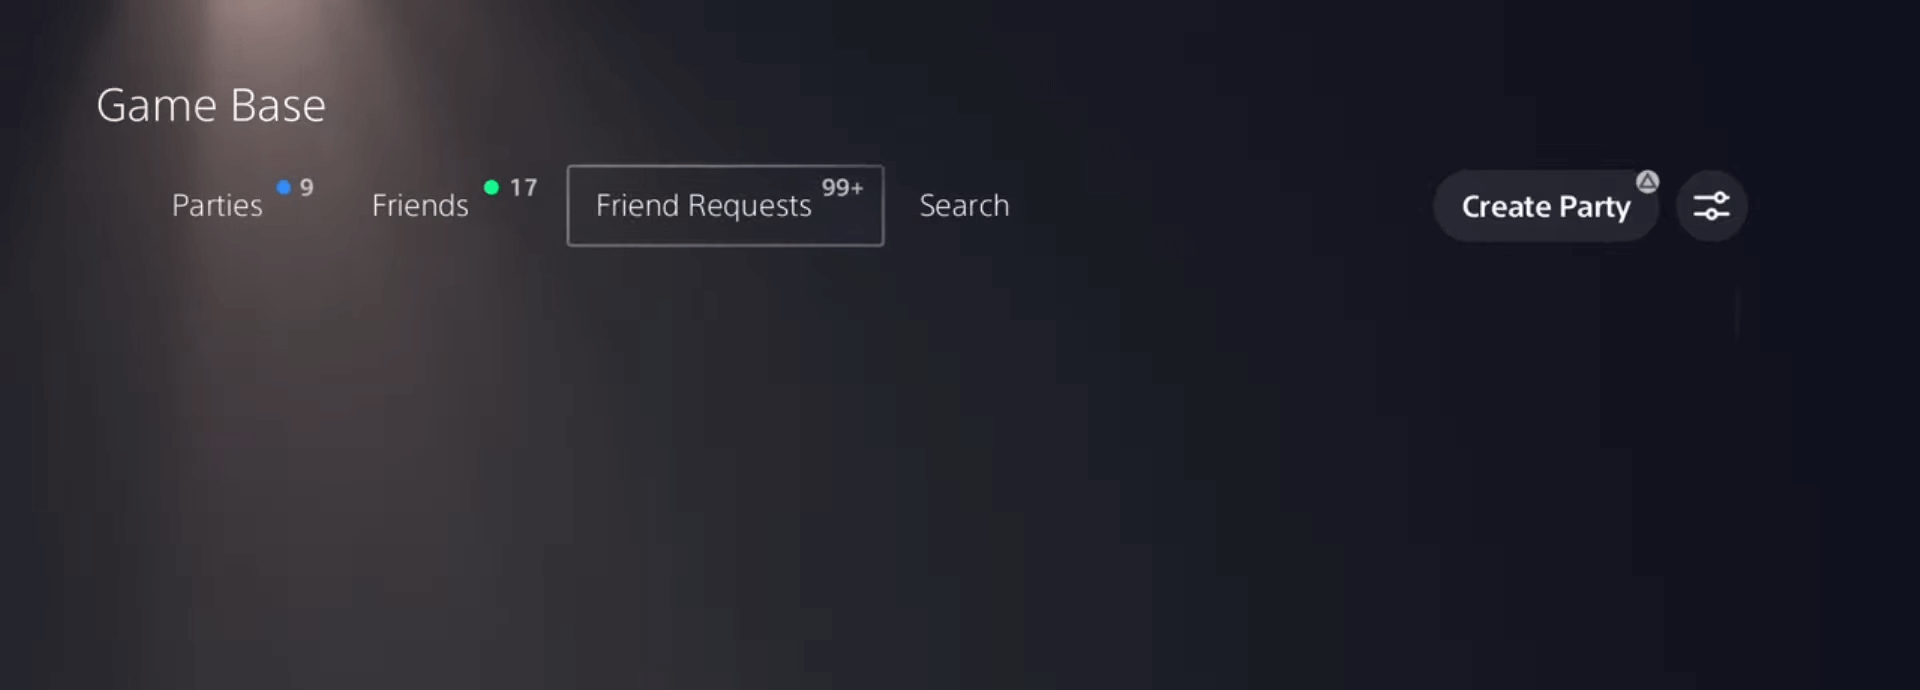 PlayStation 5 Friend Requests